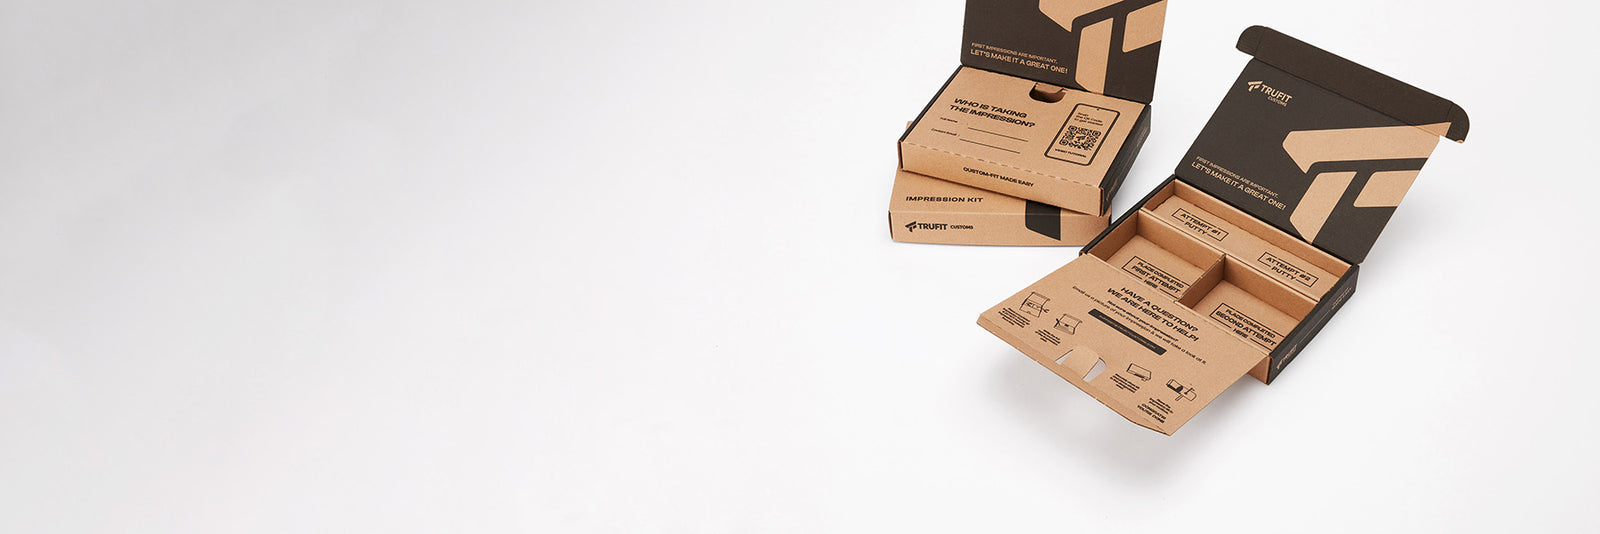 Flush Packaging can design the perfect custom shipping box for your e-commerce business